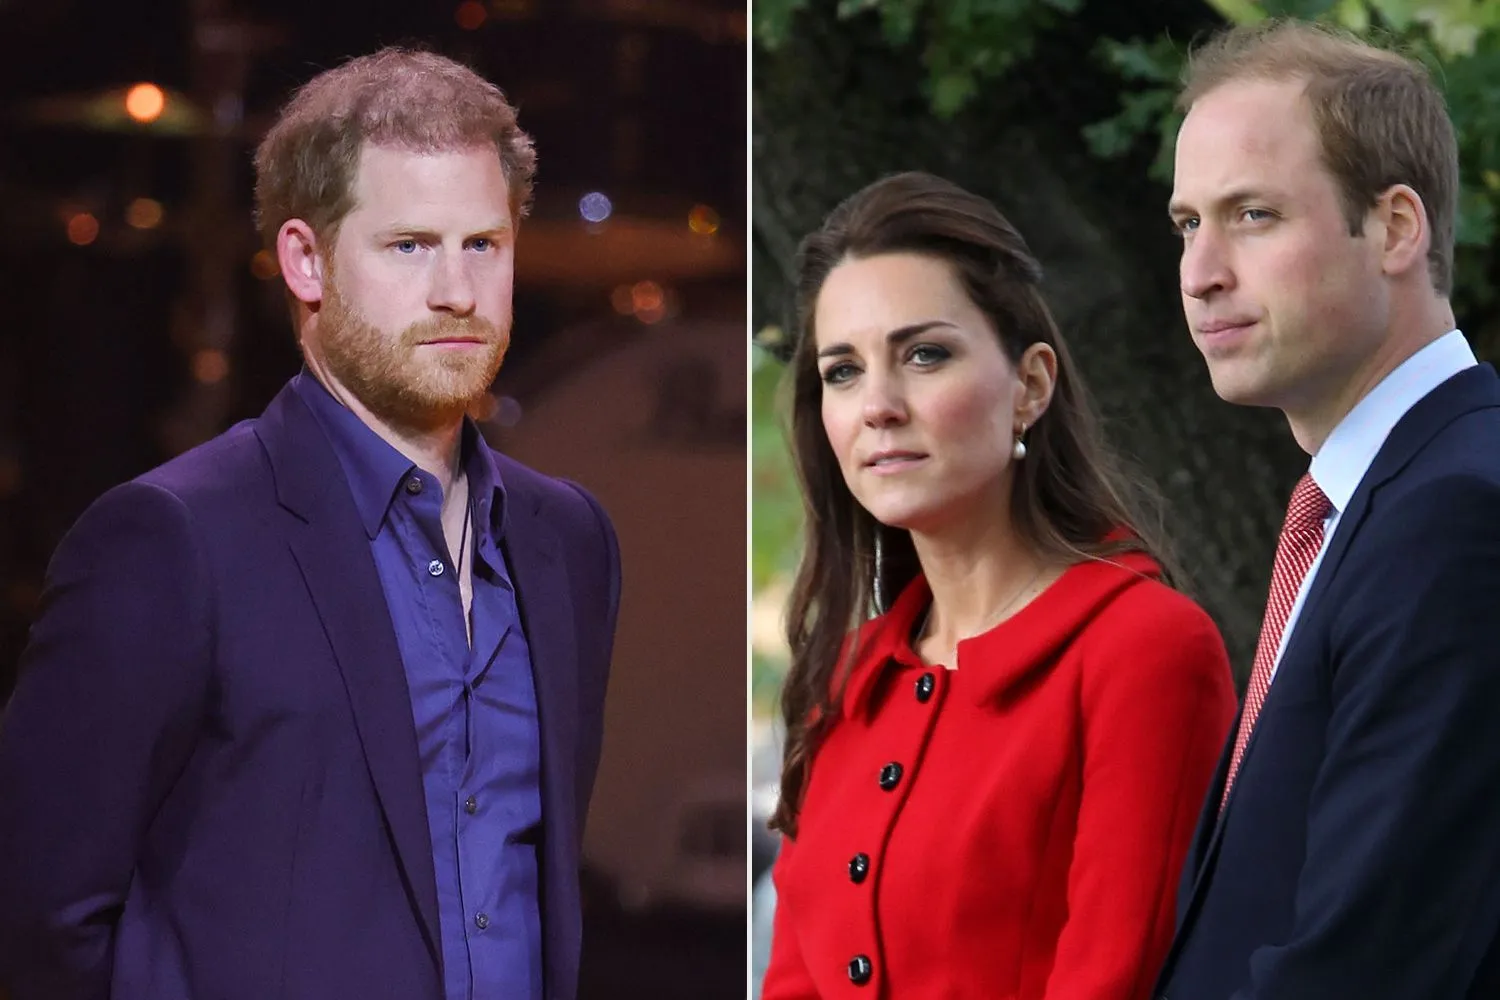 kate-middleton-wants-prince-william-to-stand-up-for-her-against-the-claims-made-by-prince-harry